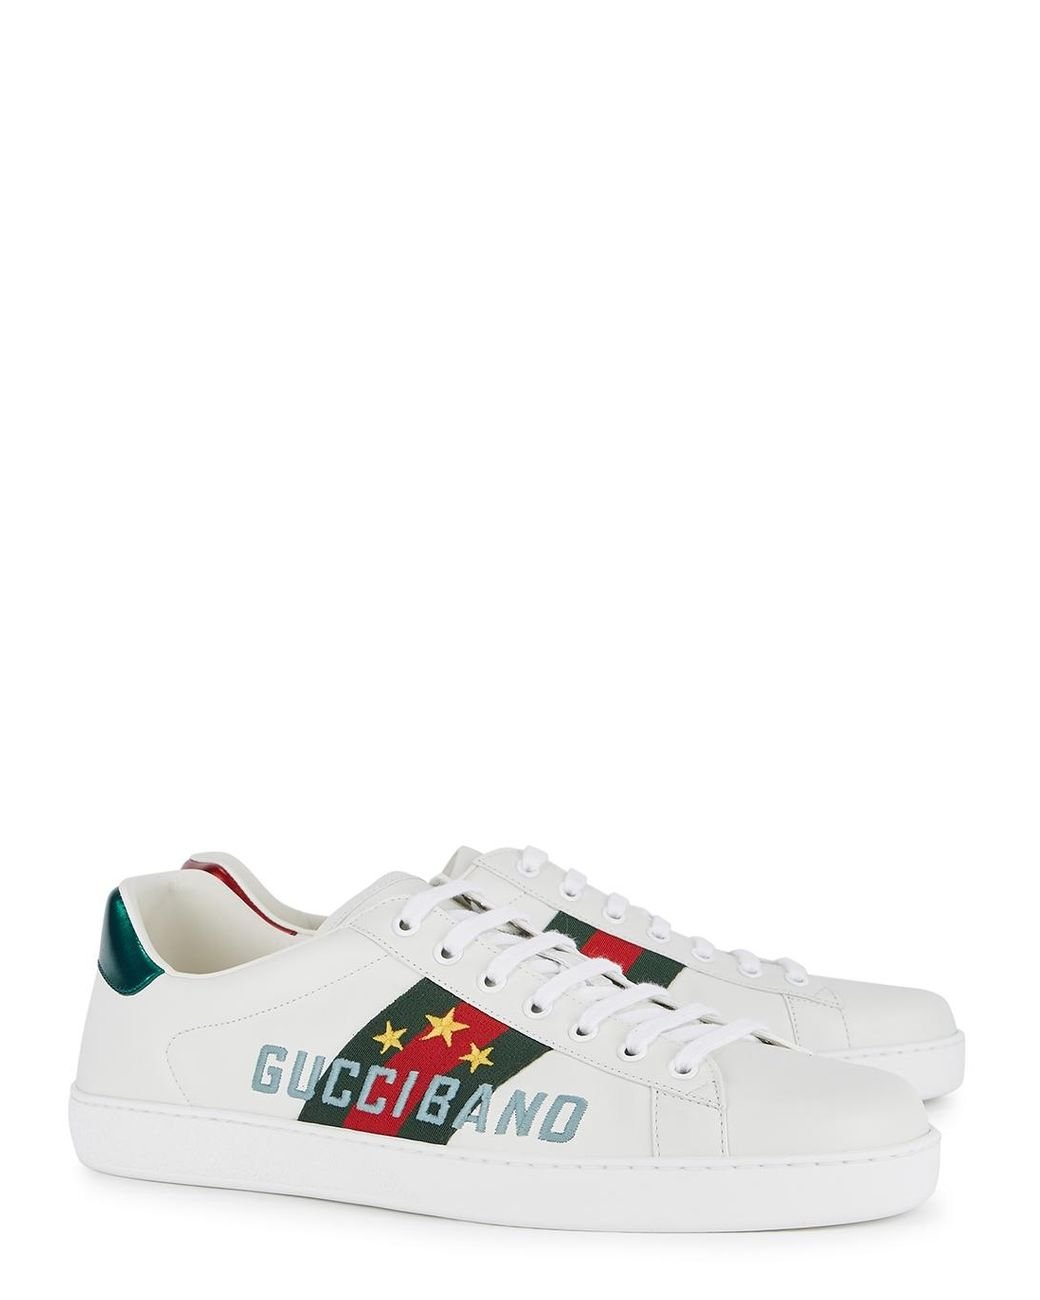 Gucci Ace Off-white Embroidered Leather Sneakers for Men - Lyst